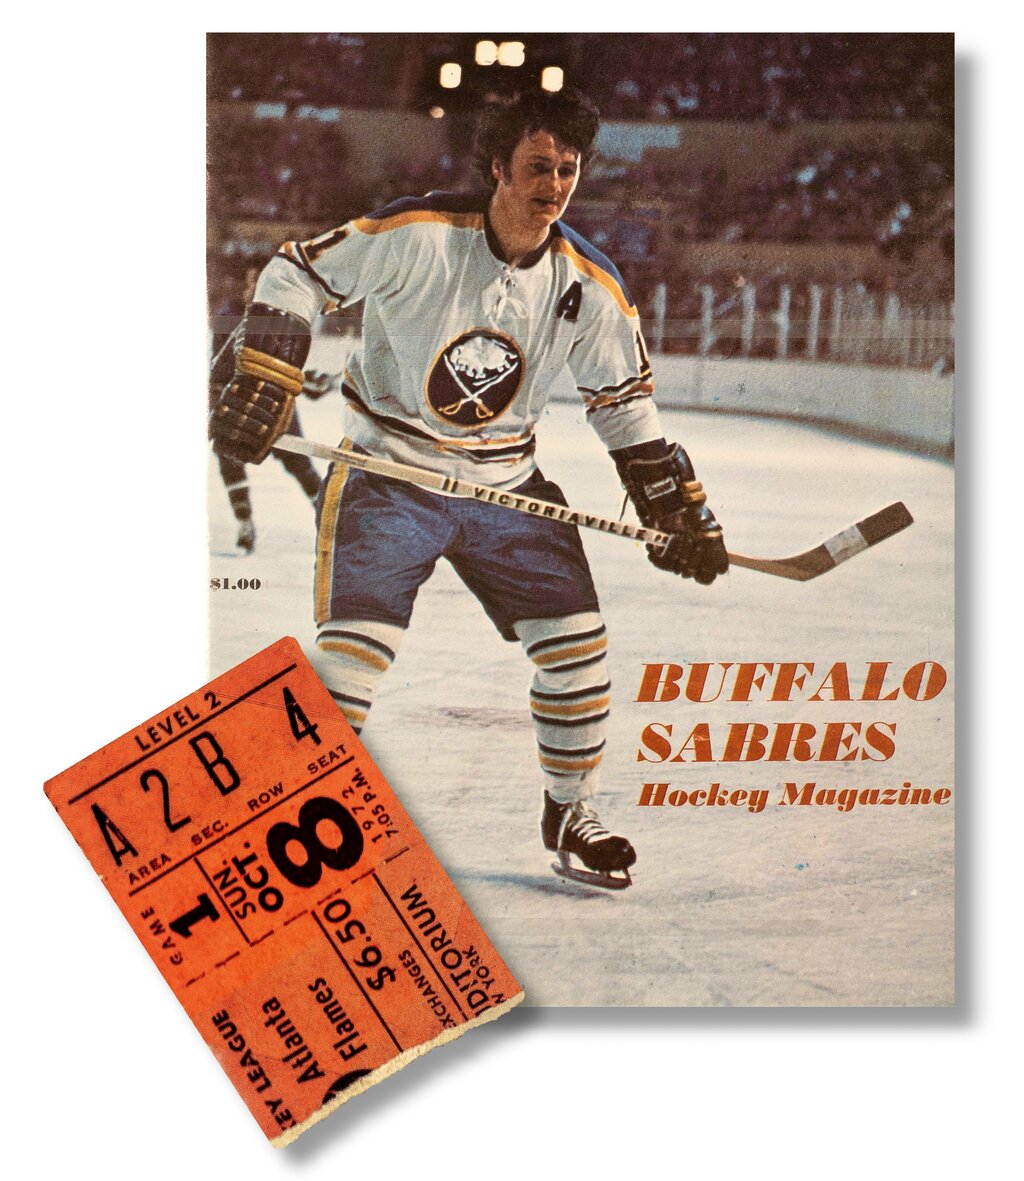 They Wore It Once: Sabres Players & Their Unique Numbers